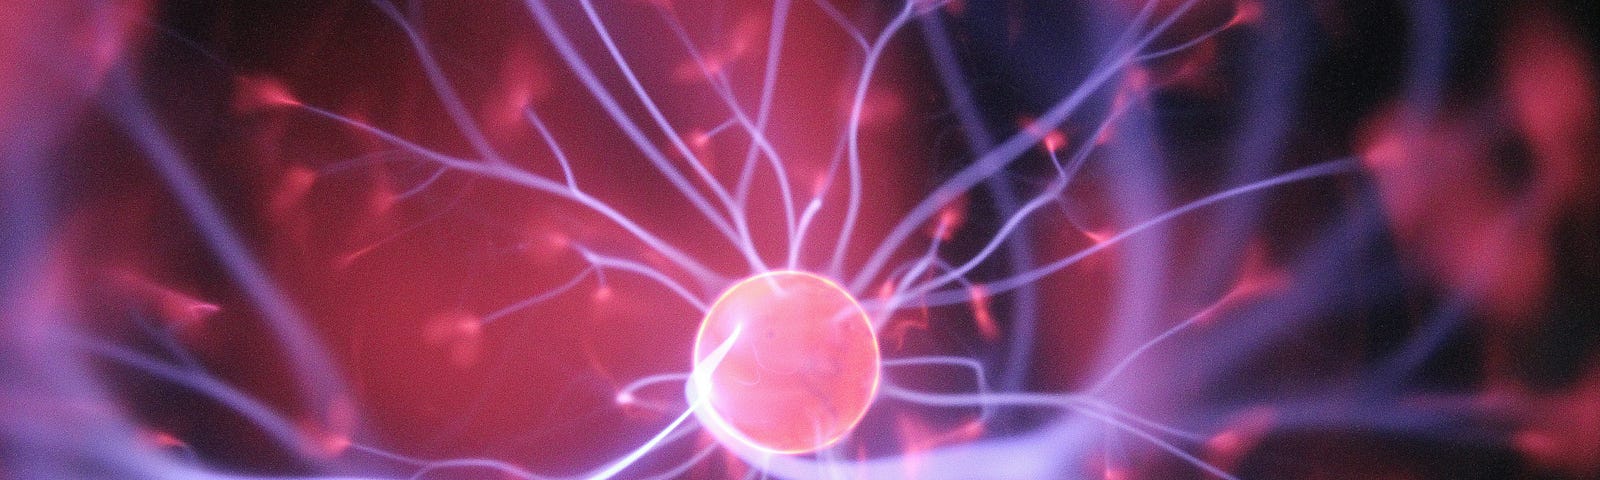 Losing but never lost — A plasma ball